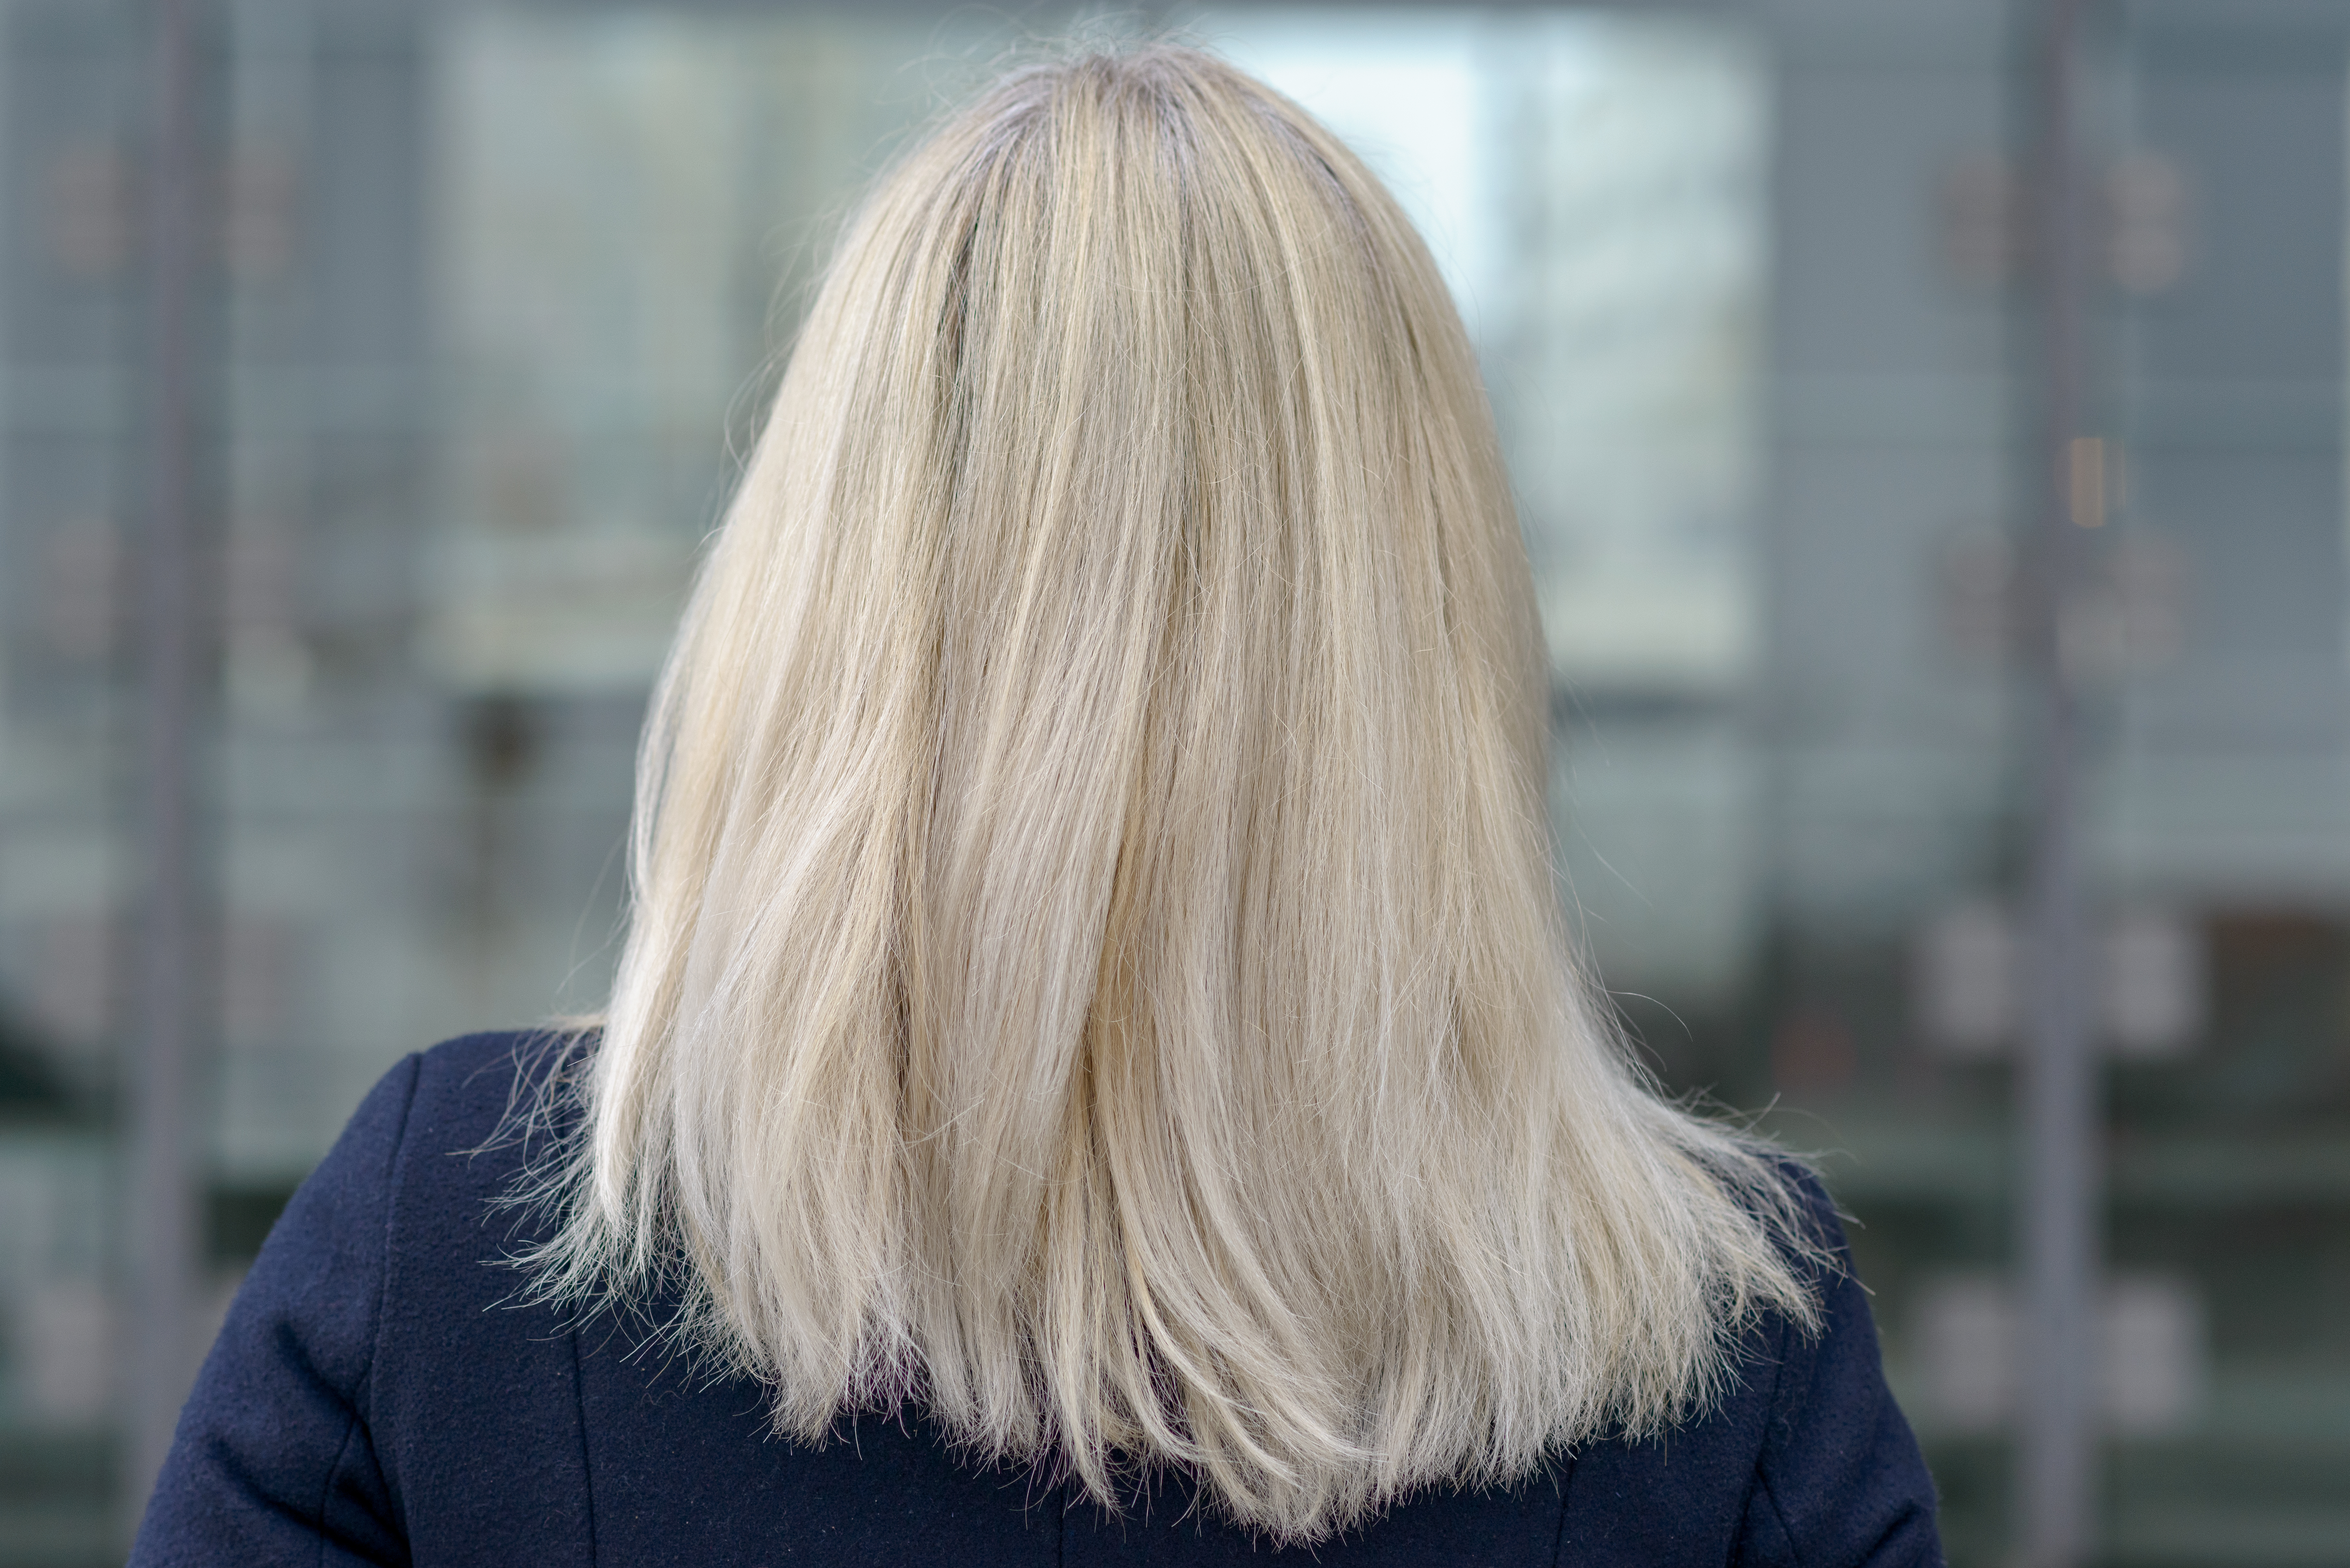 A rear view of a woman with shoulder-length blonde hair | Source: Shutterstock